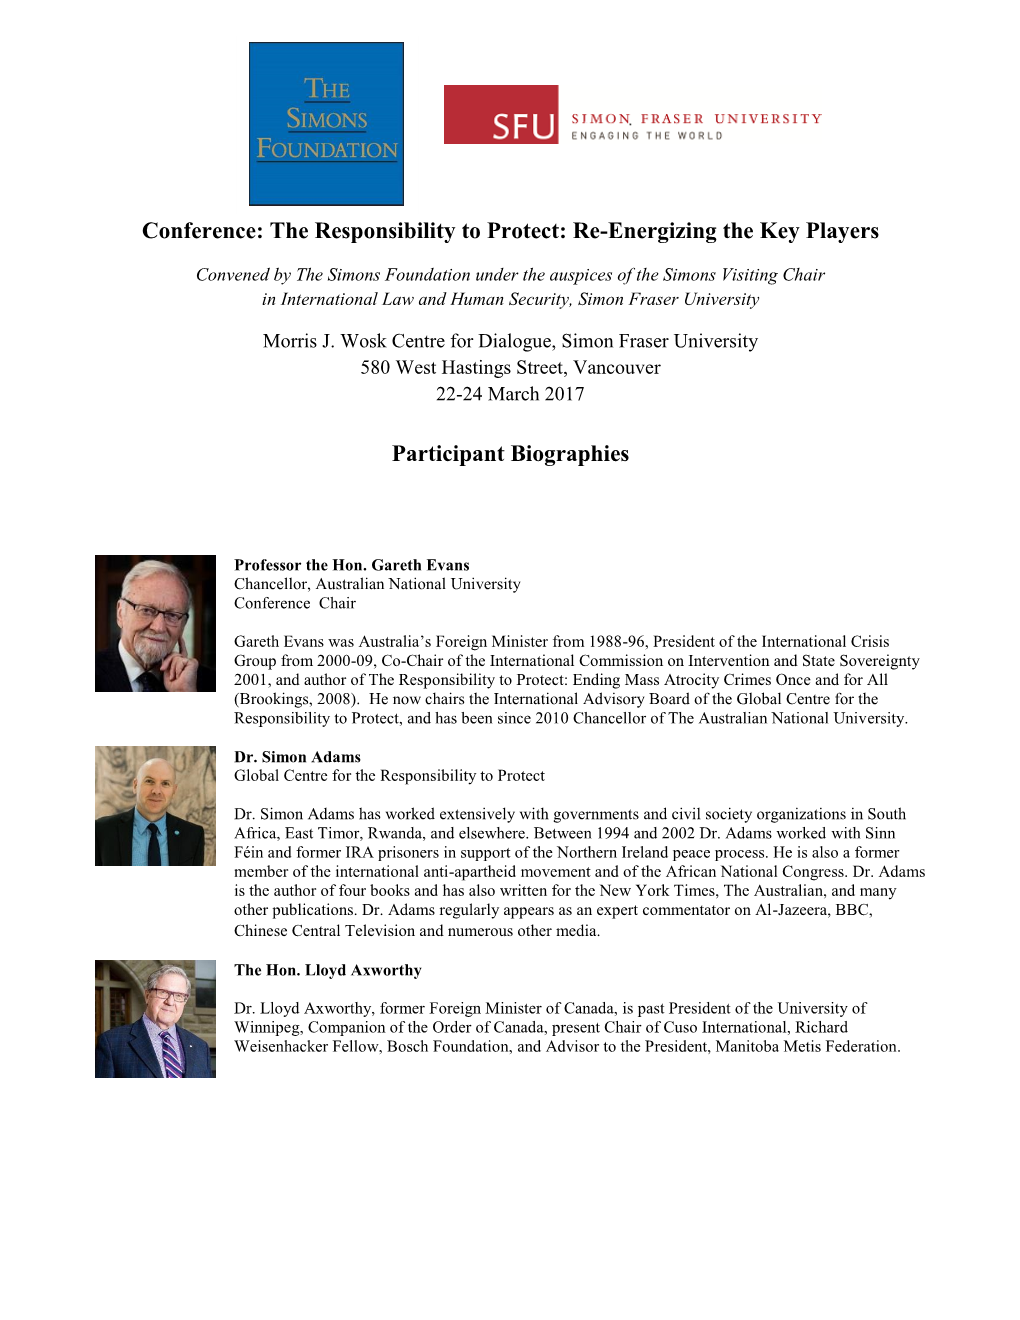 Conference: the Responsibility to Protect: Re-Energizing the Key Players Participant Biographies